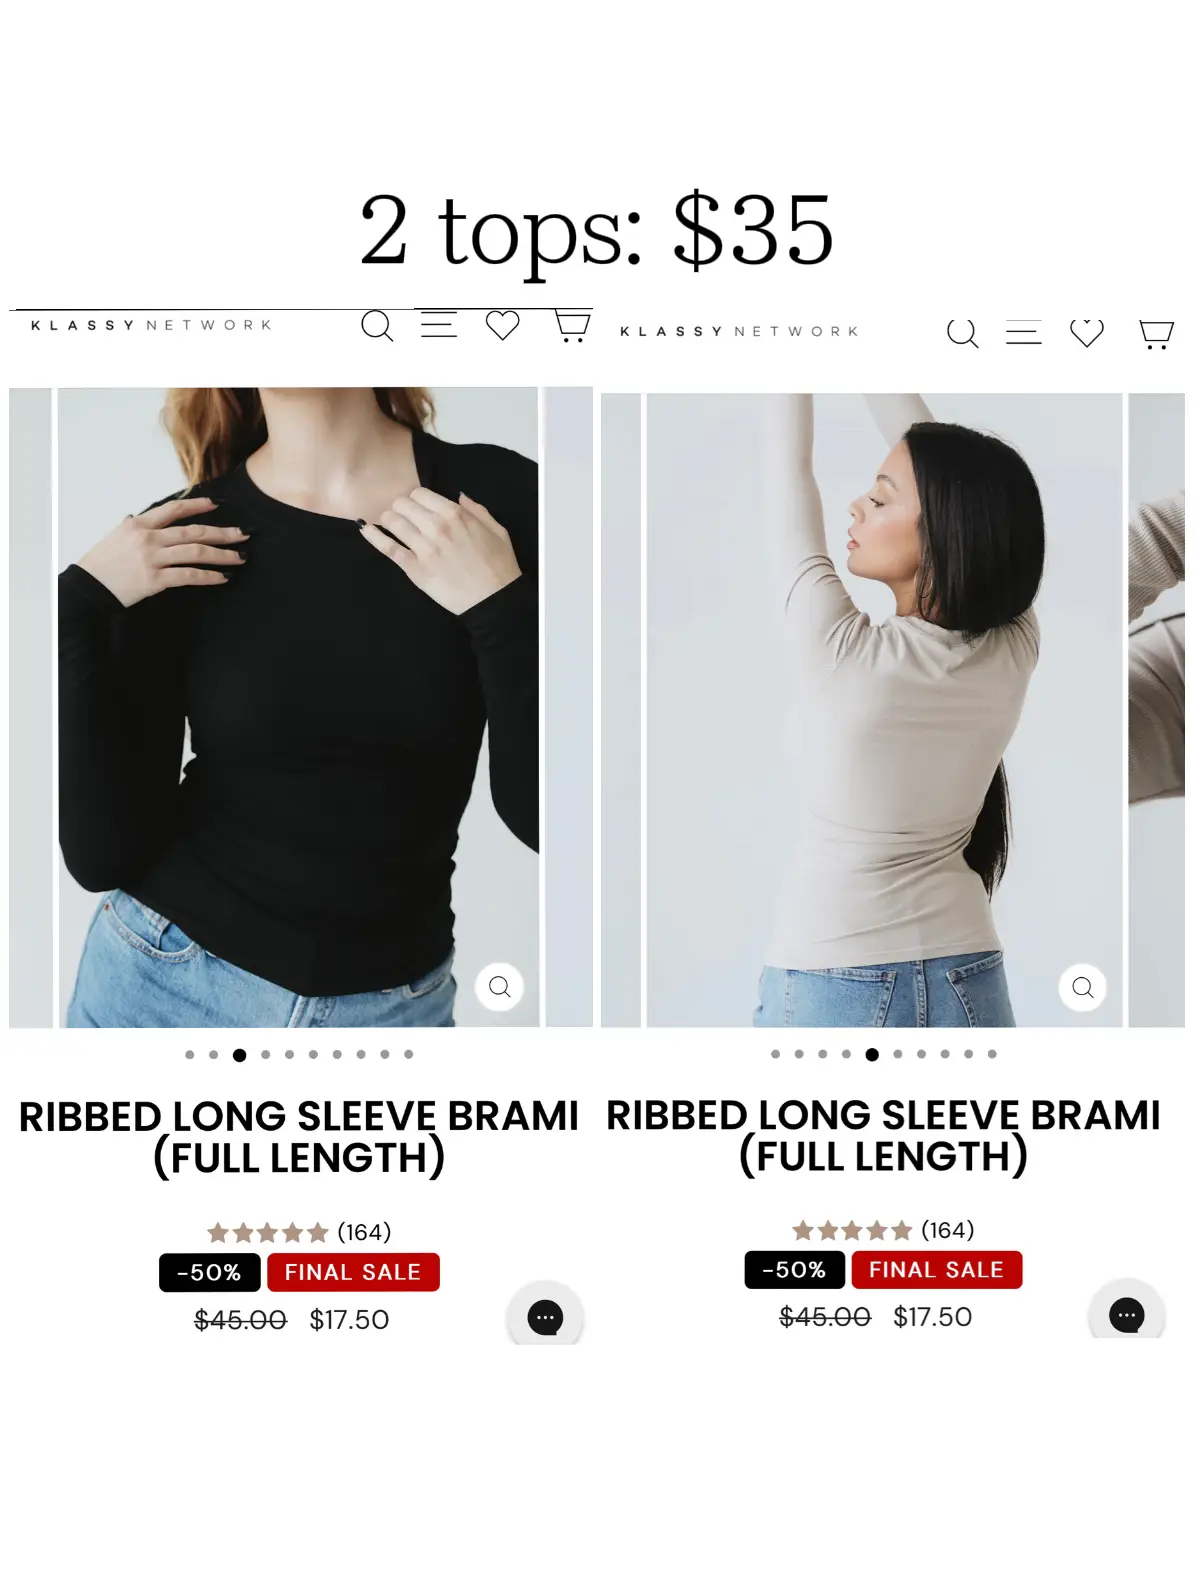 NO BRA TOPS!?, Klassy Network Try-on Haul and Review